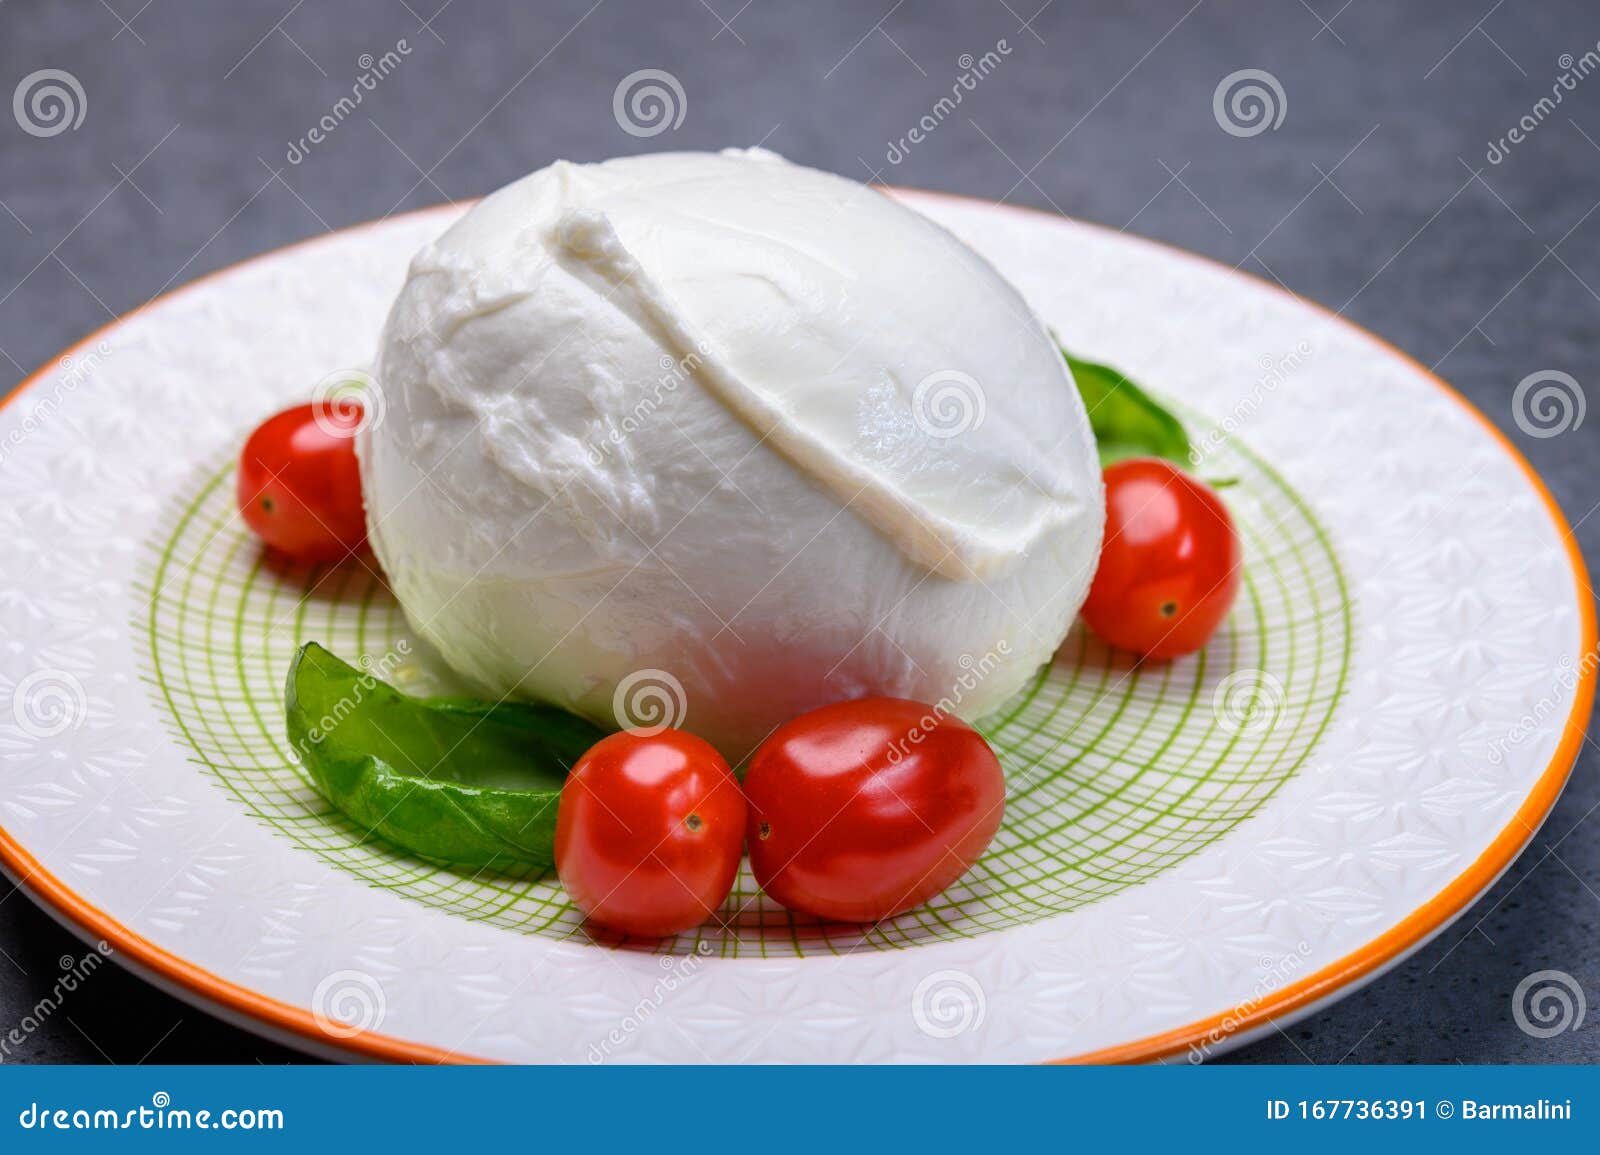 cheese collection, soft white italian mozzarella di bufala campana with fresh green basil leaves and red cherry tomatoes